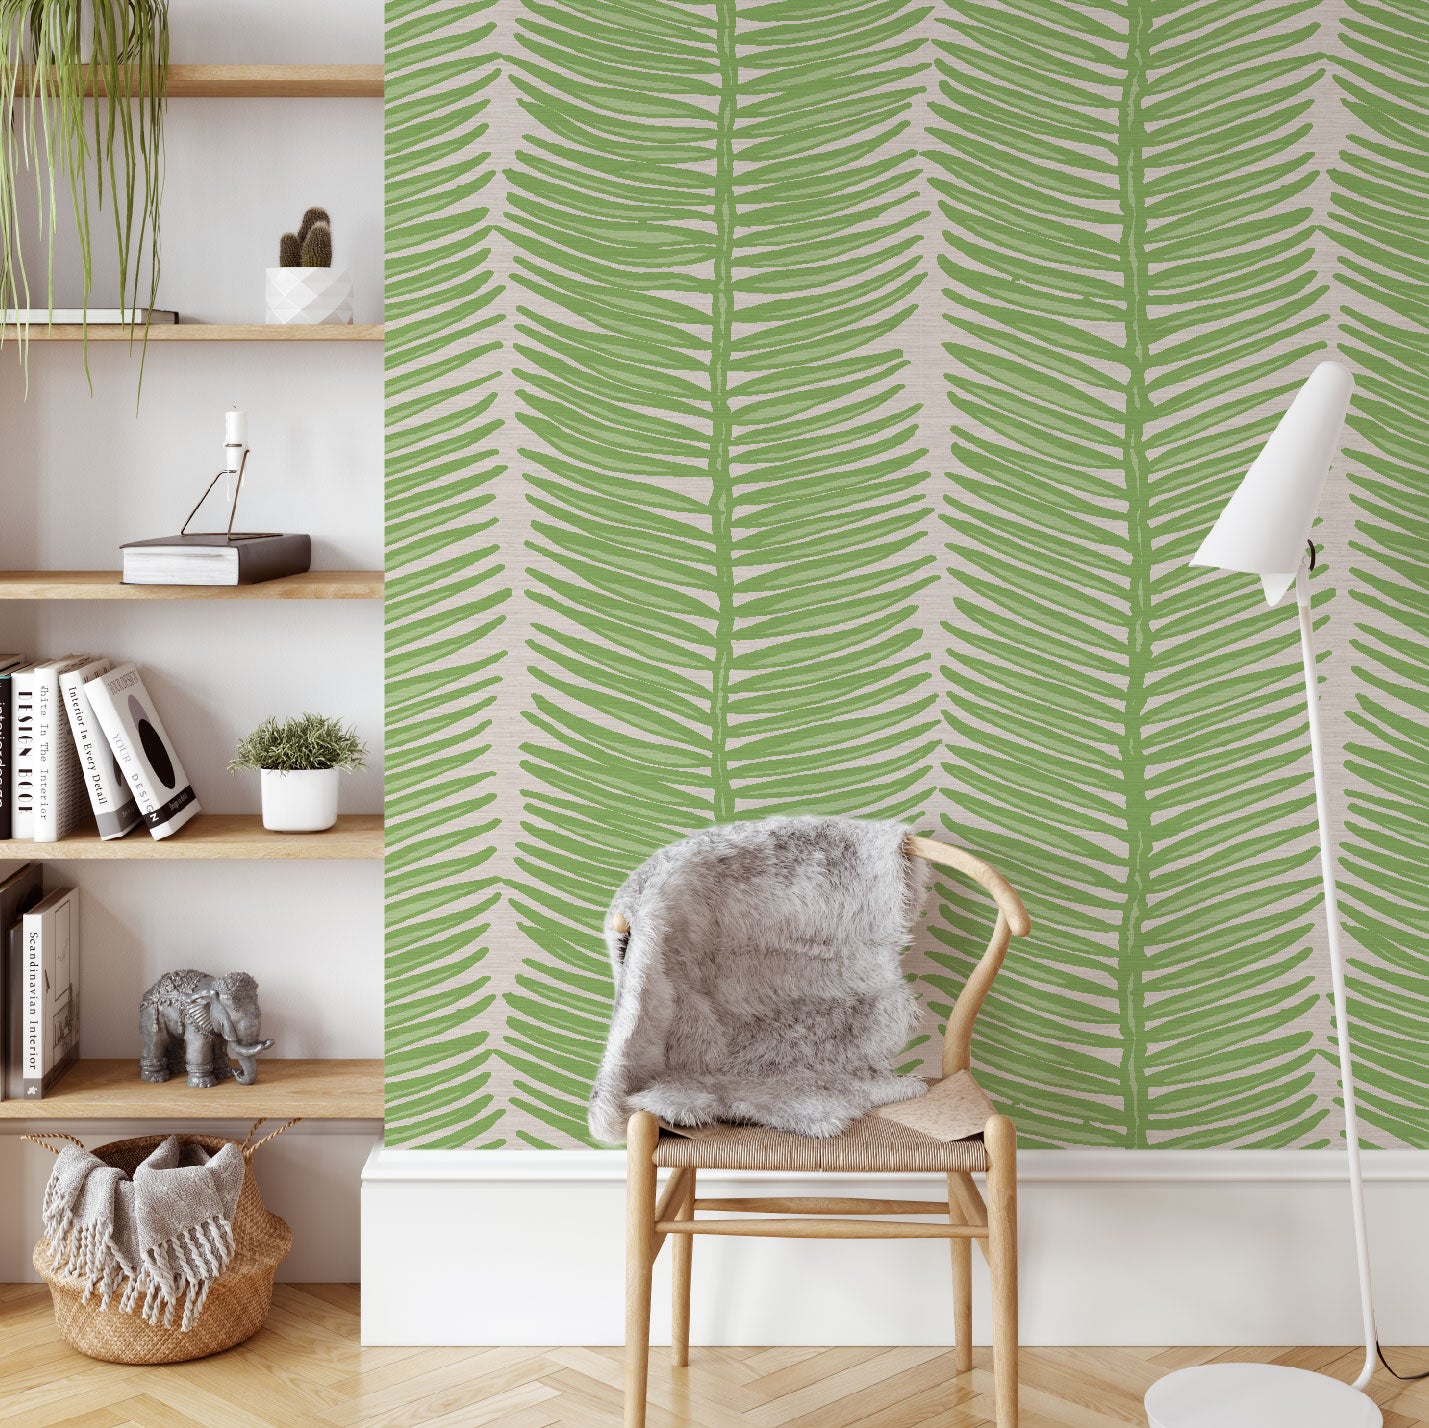 Living room with cream based grasscloth wallpaper with vertical linear striped fern leaves filled with light green leaves and outlined in a tonally darker green